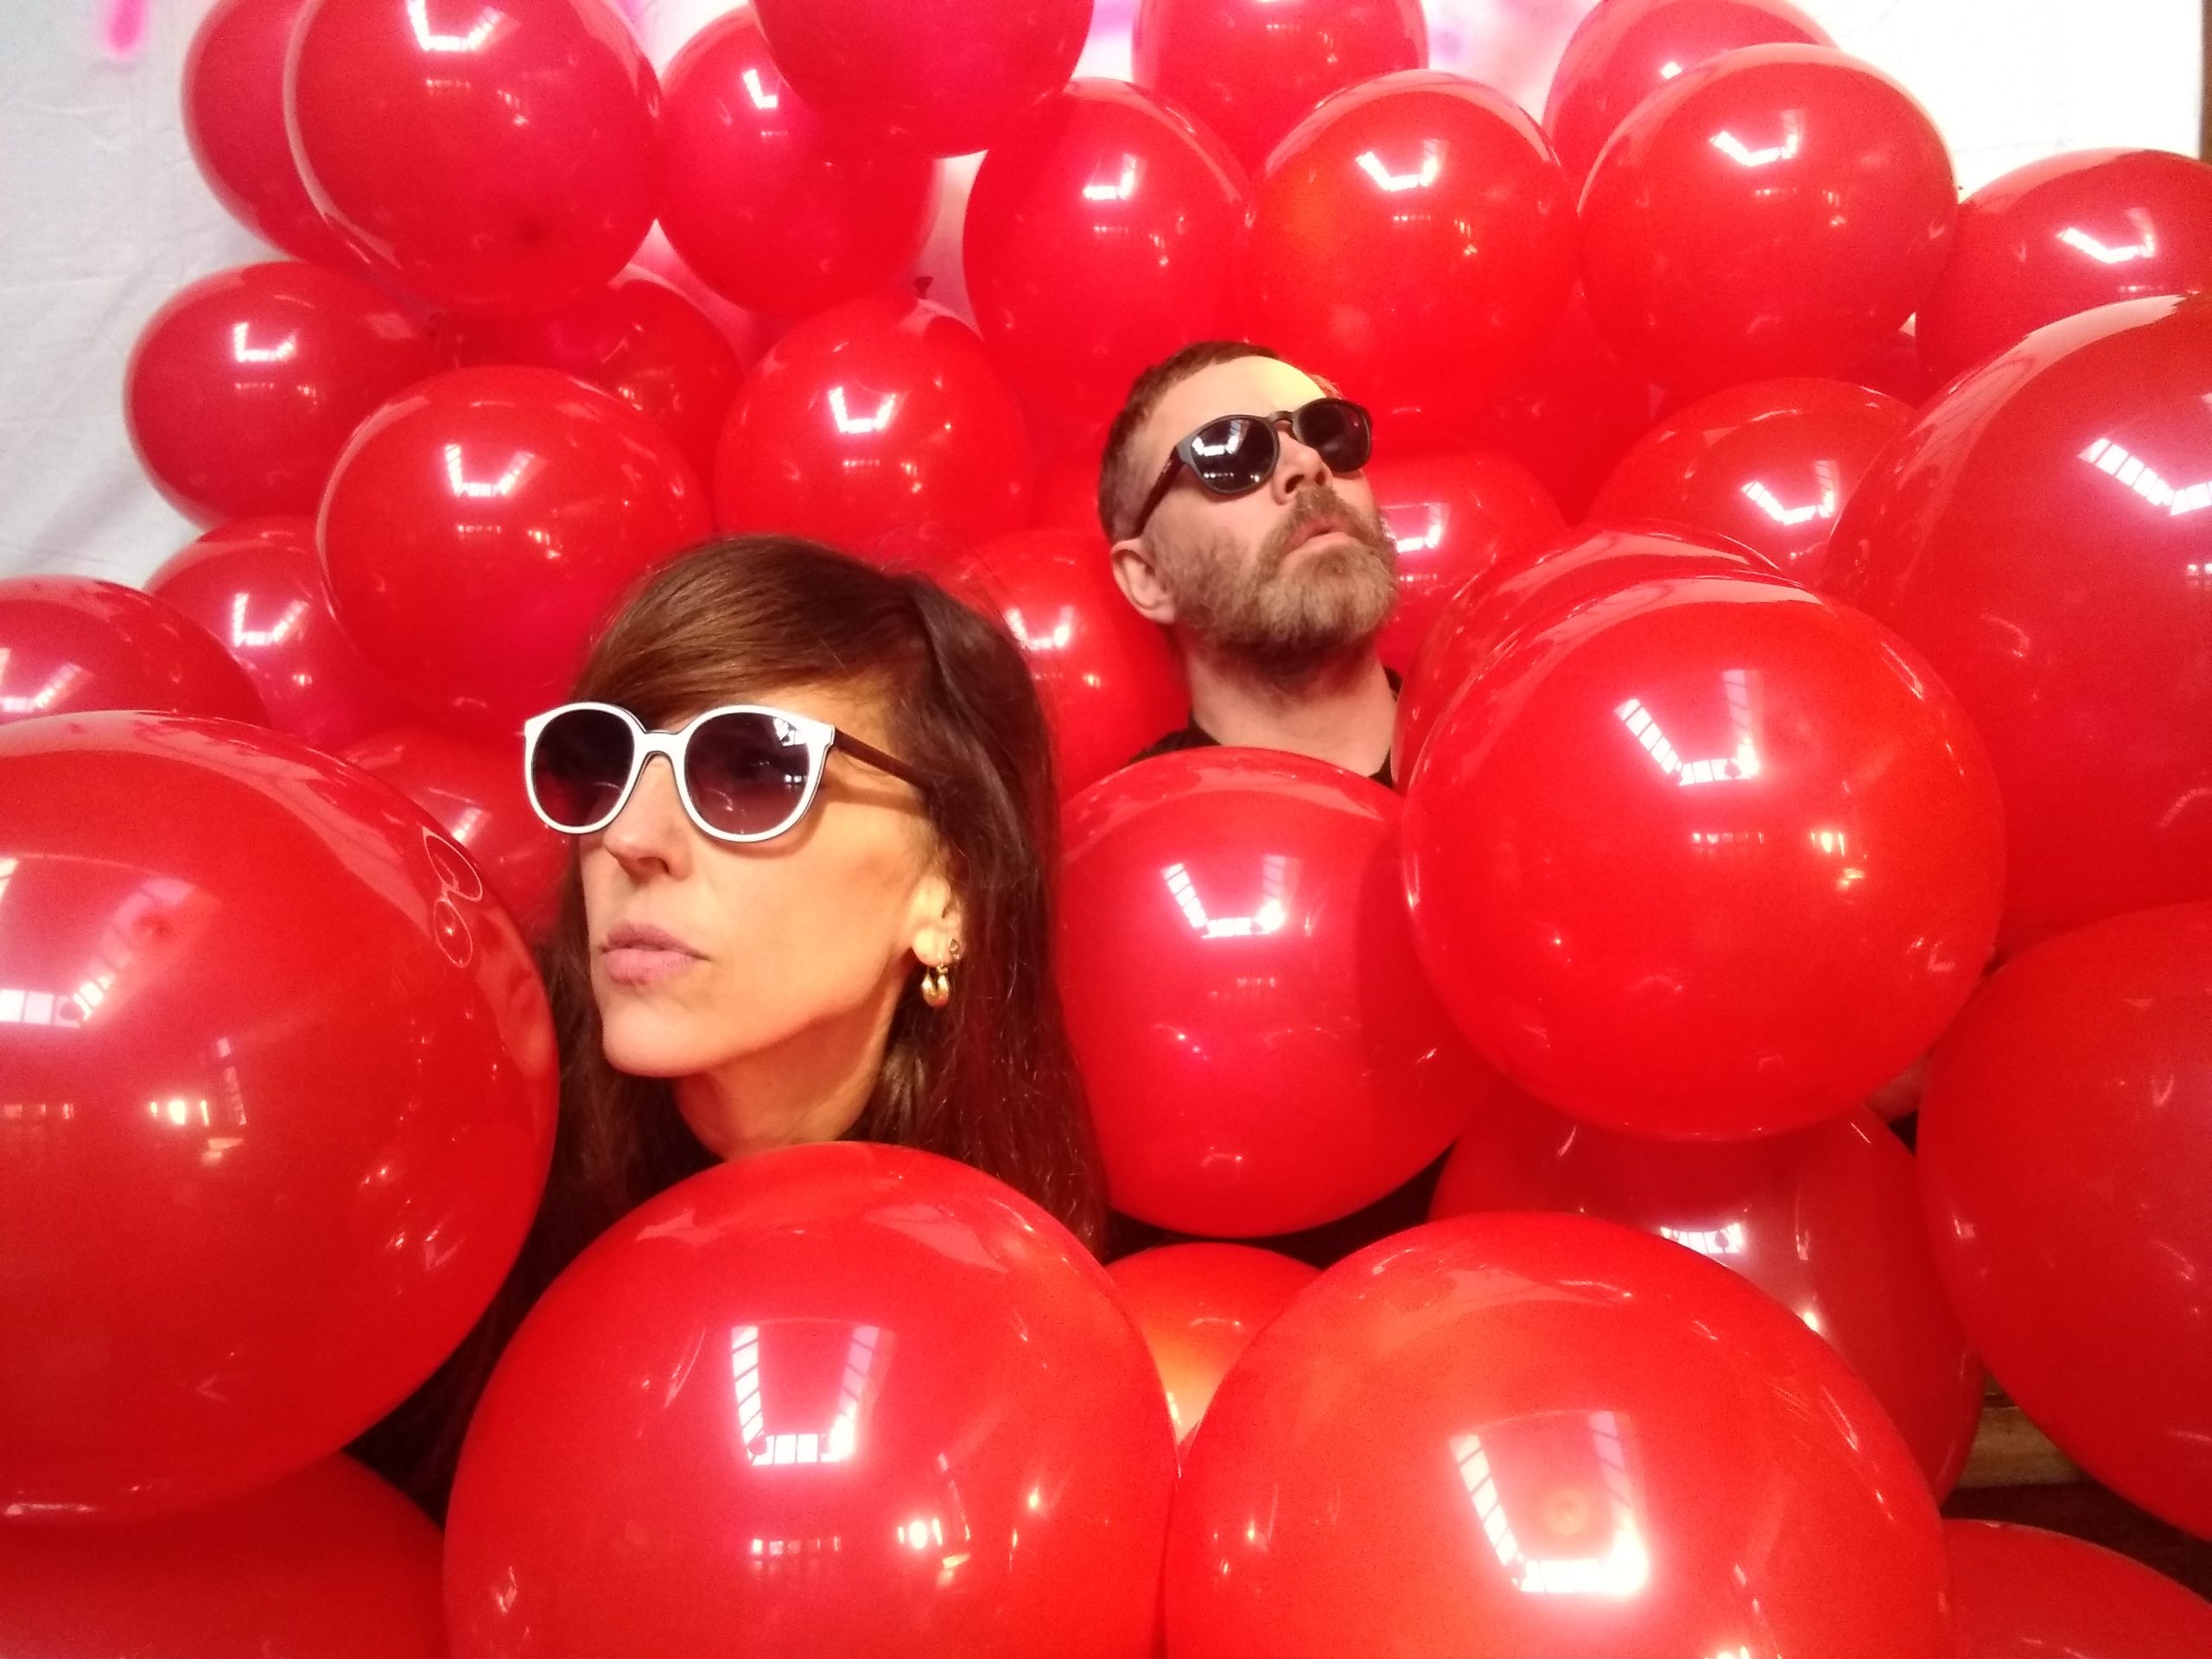 The two members of the band Lunge in amongst loads of reds balloons